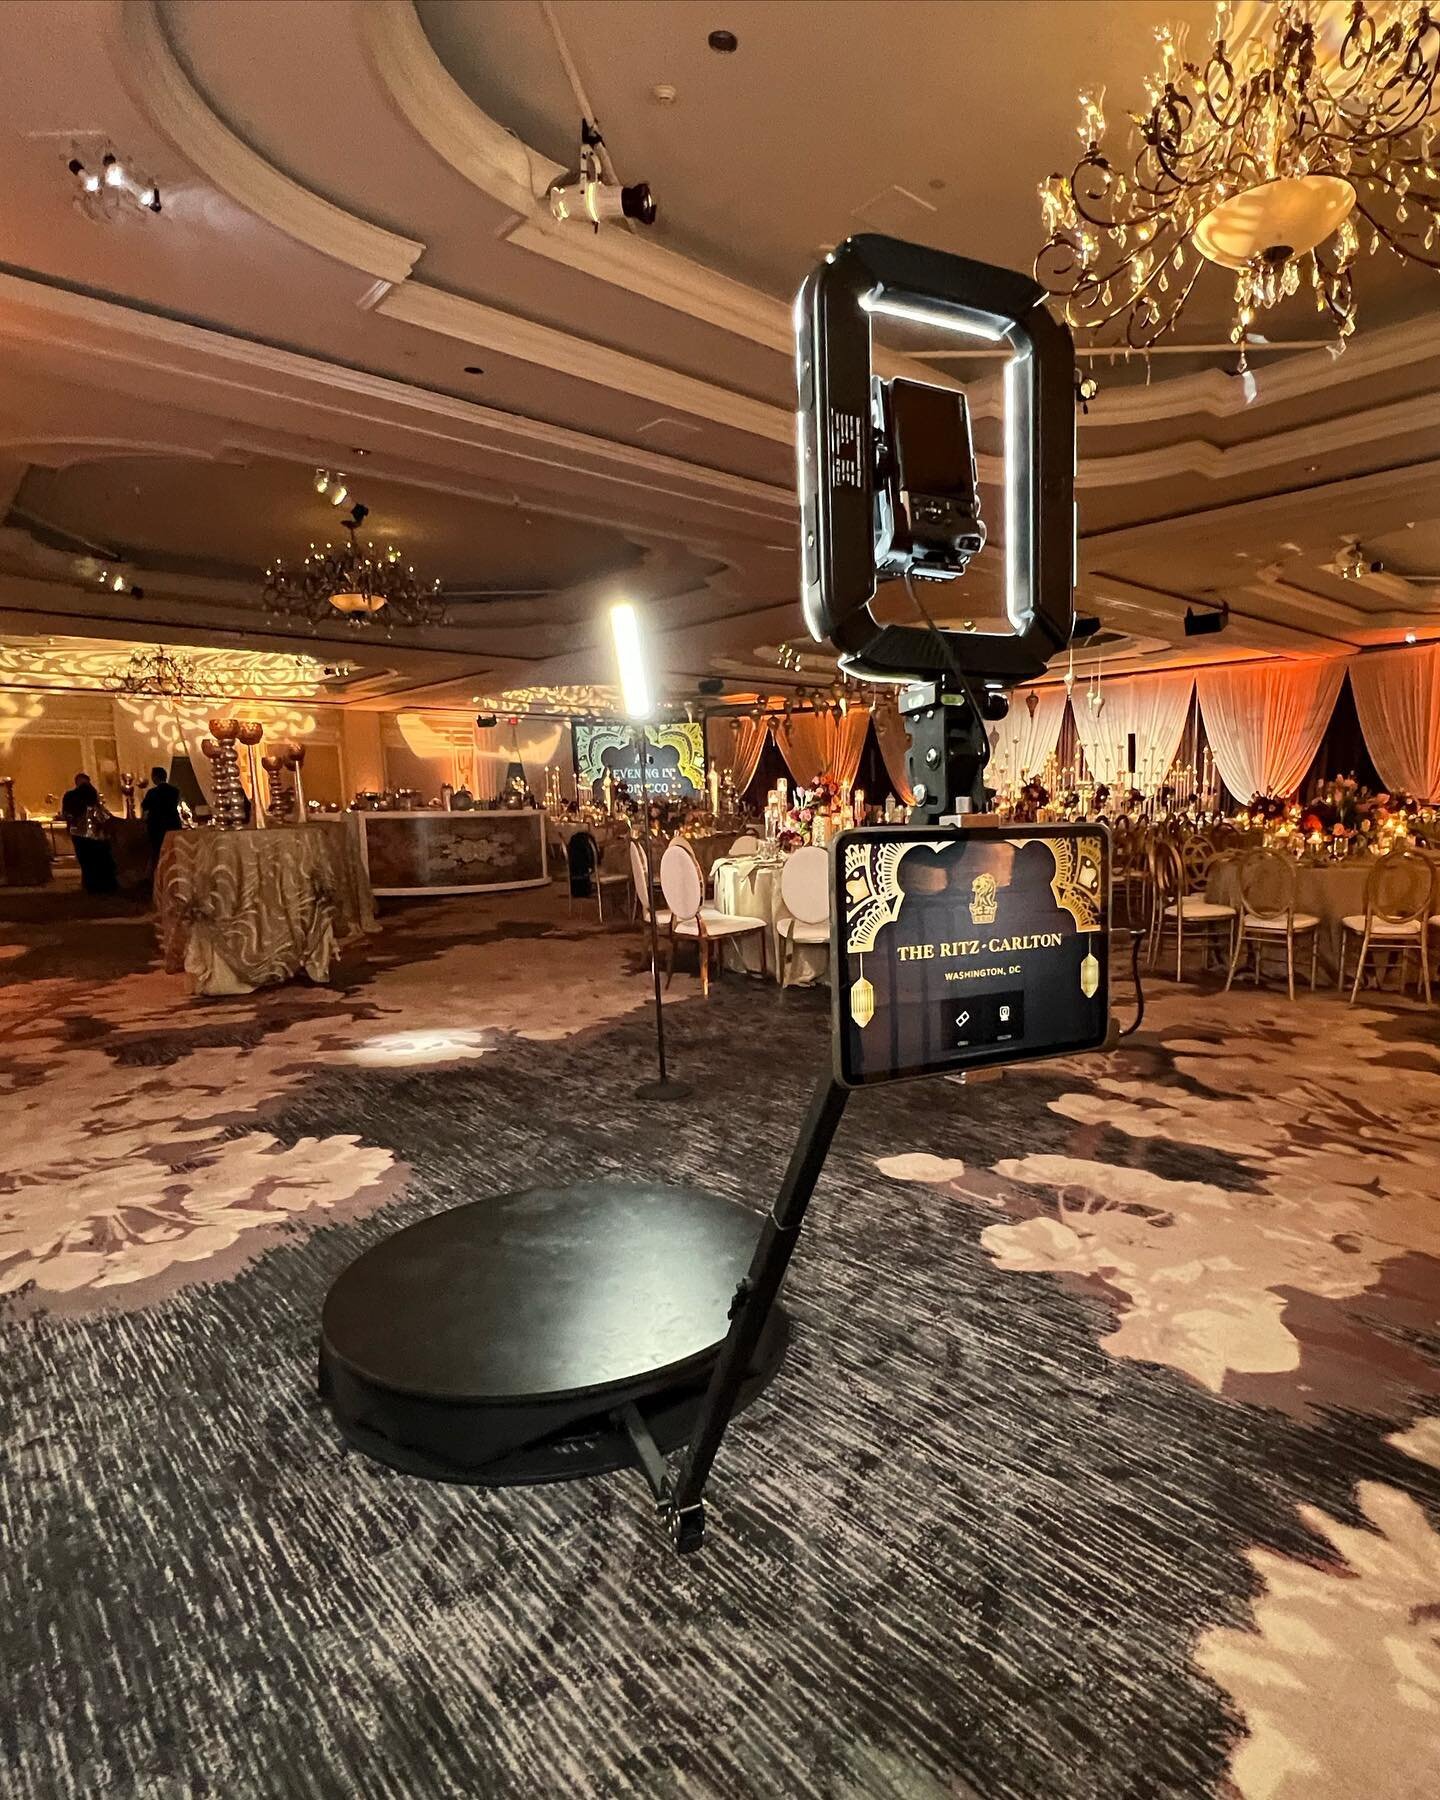 Do you have a big event coming up with a lot of guests? Book multiple Photo Booth options to keep your guests entertained and having fun throughout the evening. Send us a message if you&rsquo;re looking to make your next event &ldquo;Photoshoot Fresh